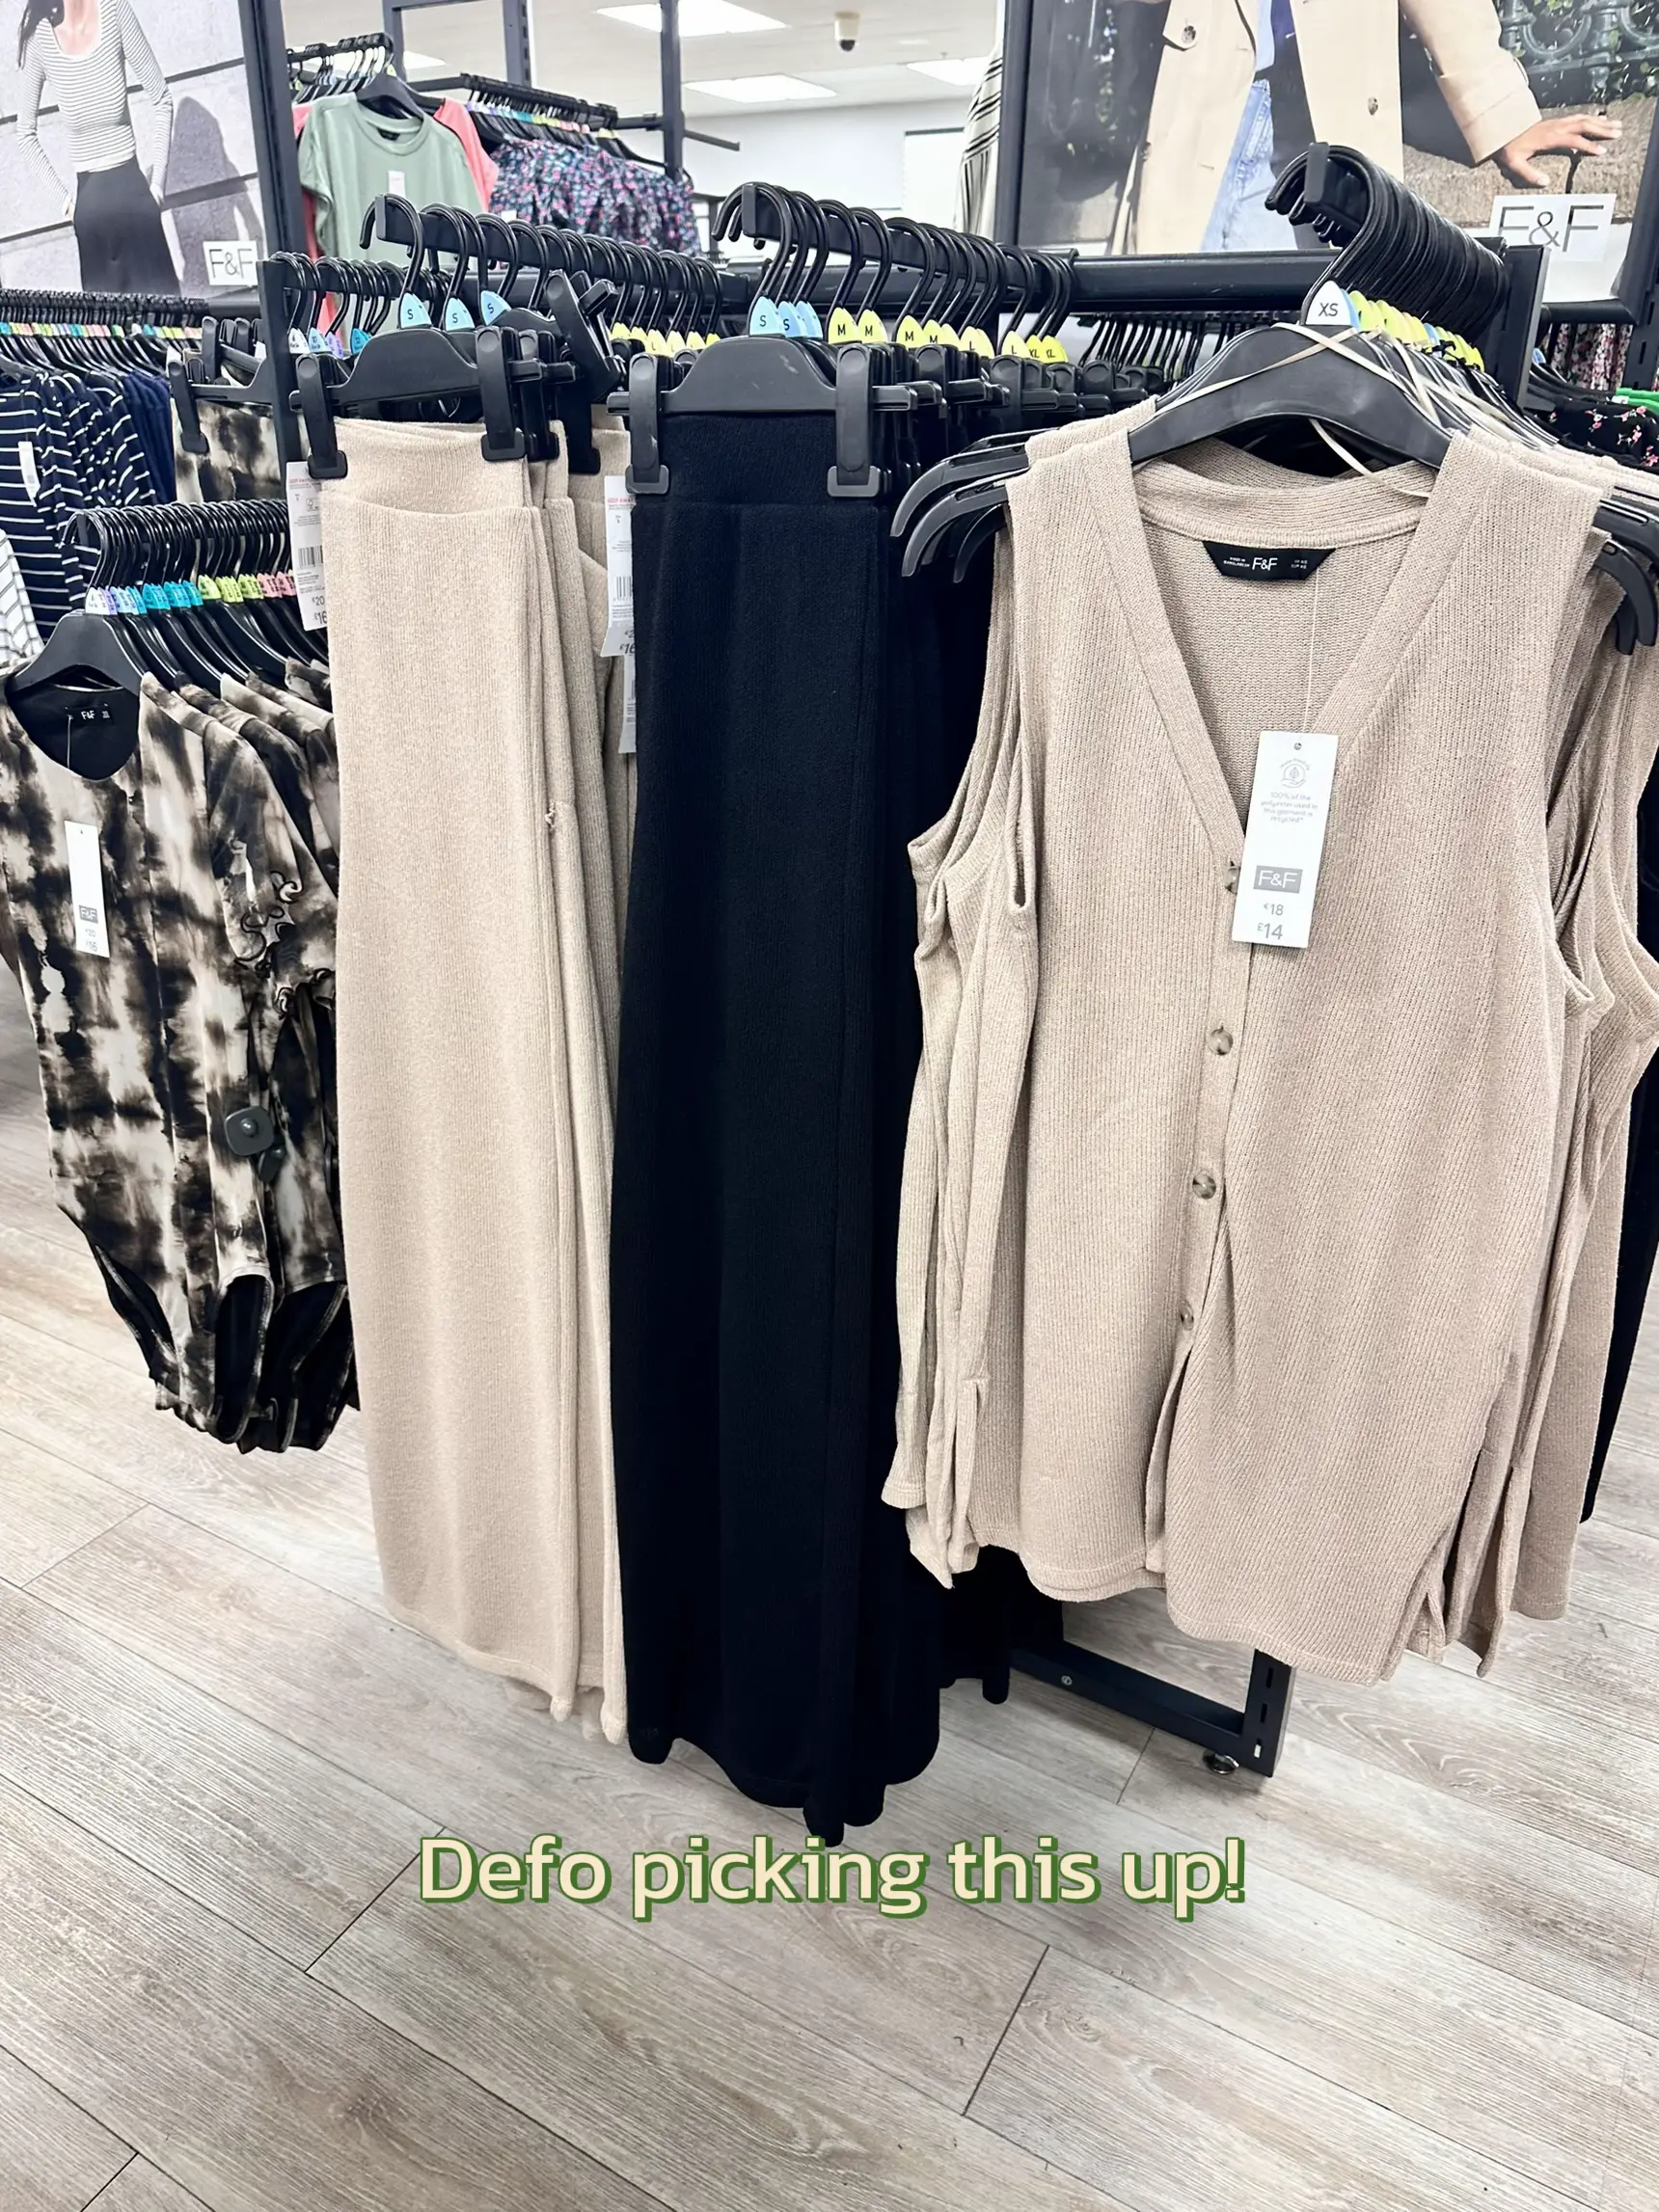 Tesco shoppers are obsessed with 'stunning' £19 F&F Clothing